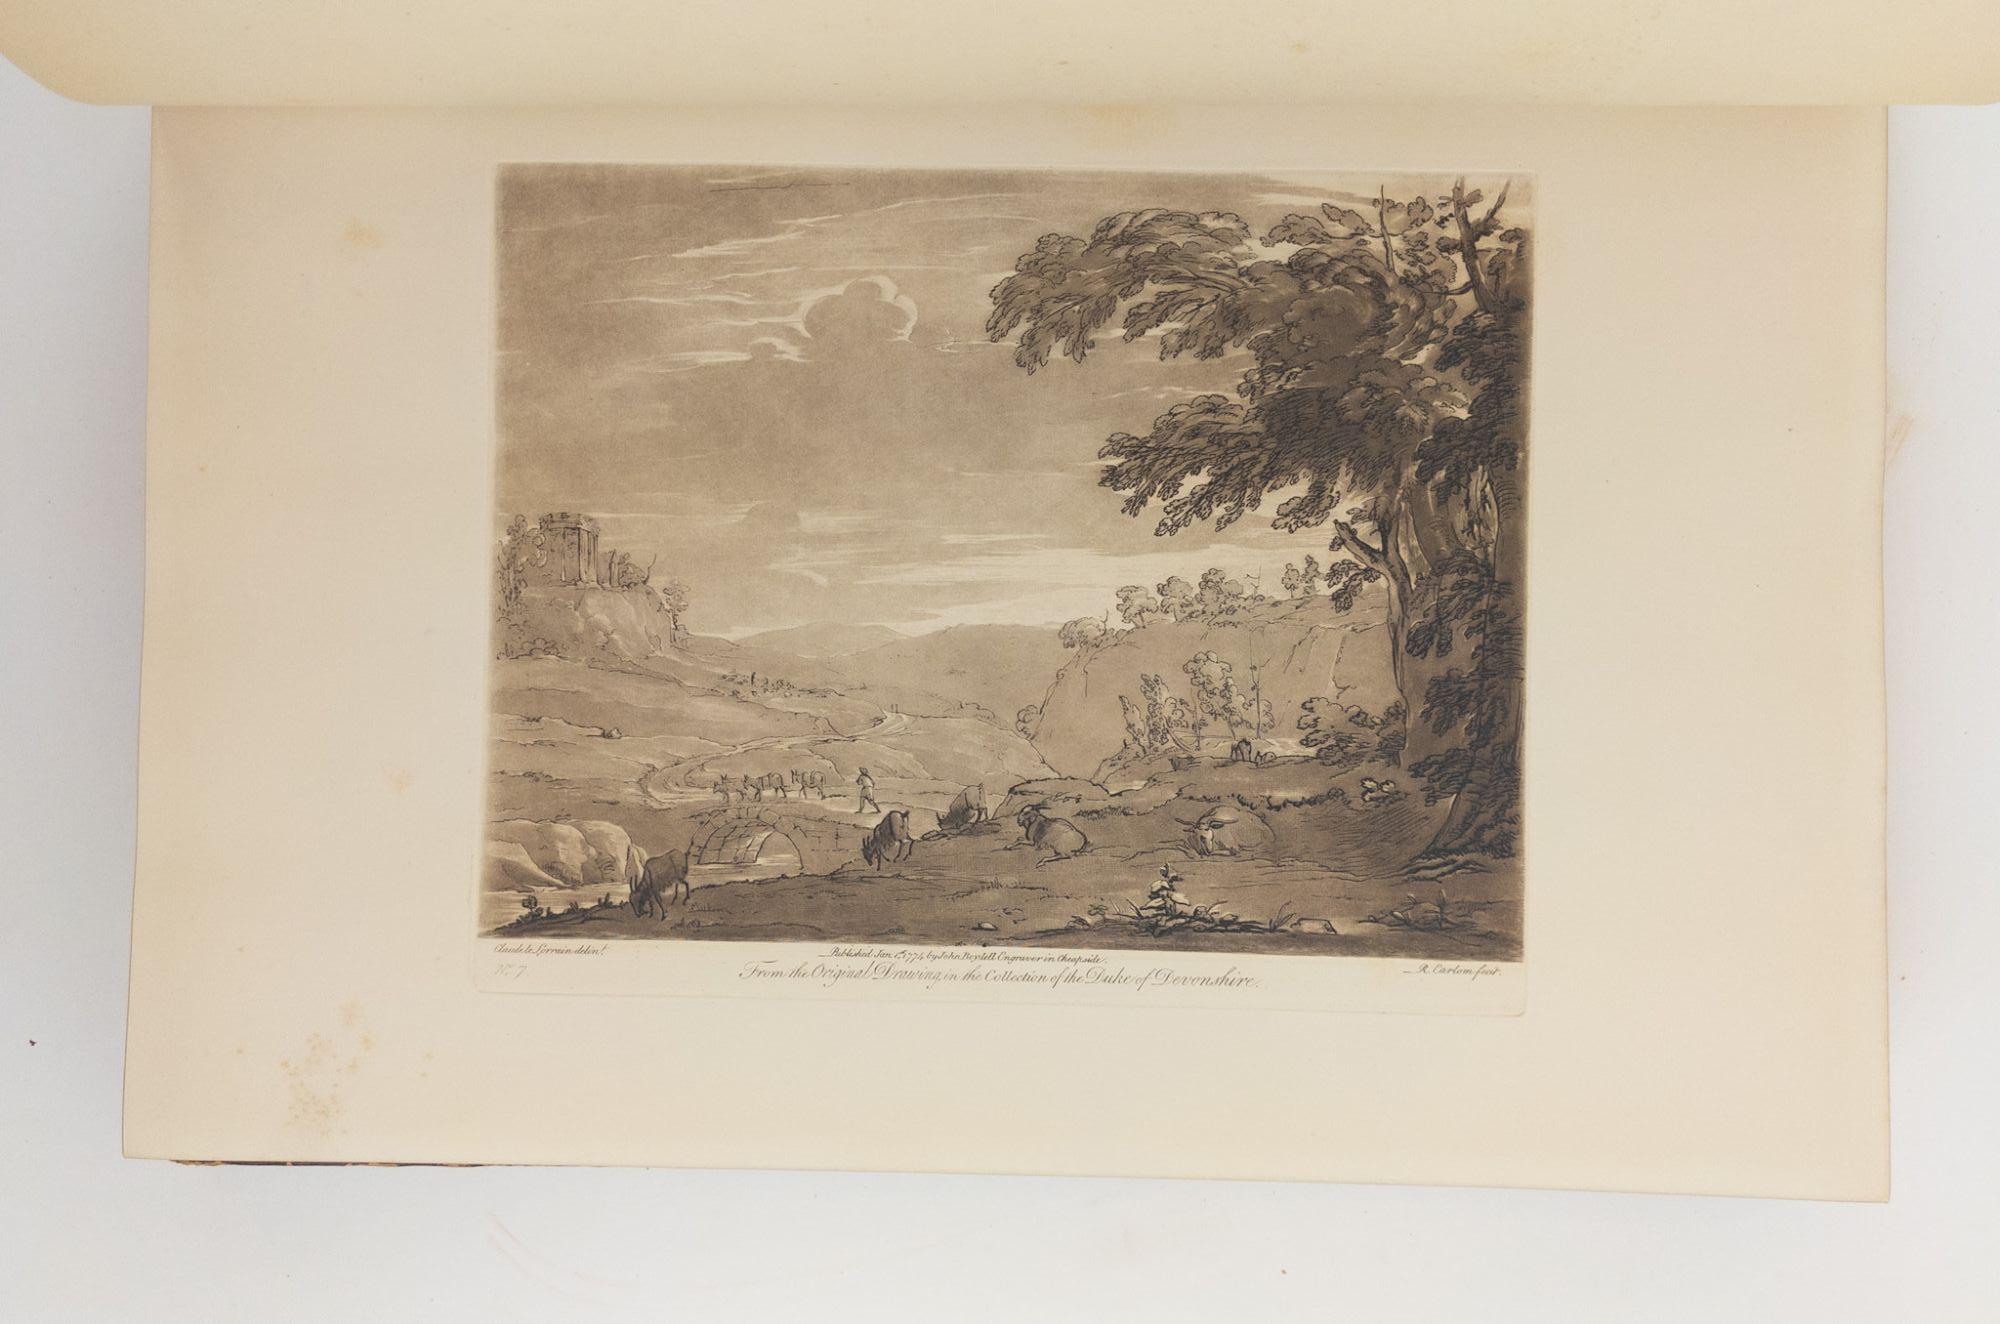 Product Image for LIBER VERITATIS; OR A COLLECTION OF PRINTS AFTER THE ORIGINAL DESIGNS OF CLAUDE LE LORRAIN; IN THE COLLECTION OF [Vol. I-II] HIS GRACE THE DUKE OF DEVONSHIRE [VOL. III: THE DUKE OF DEVONSHIRE, EARL SPENCER, RICHARD PAYNE KNIGHT, BENJAMIN WEST., CHARLES LA